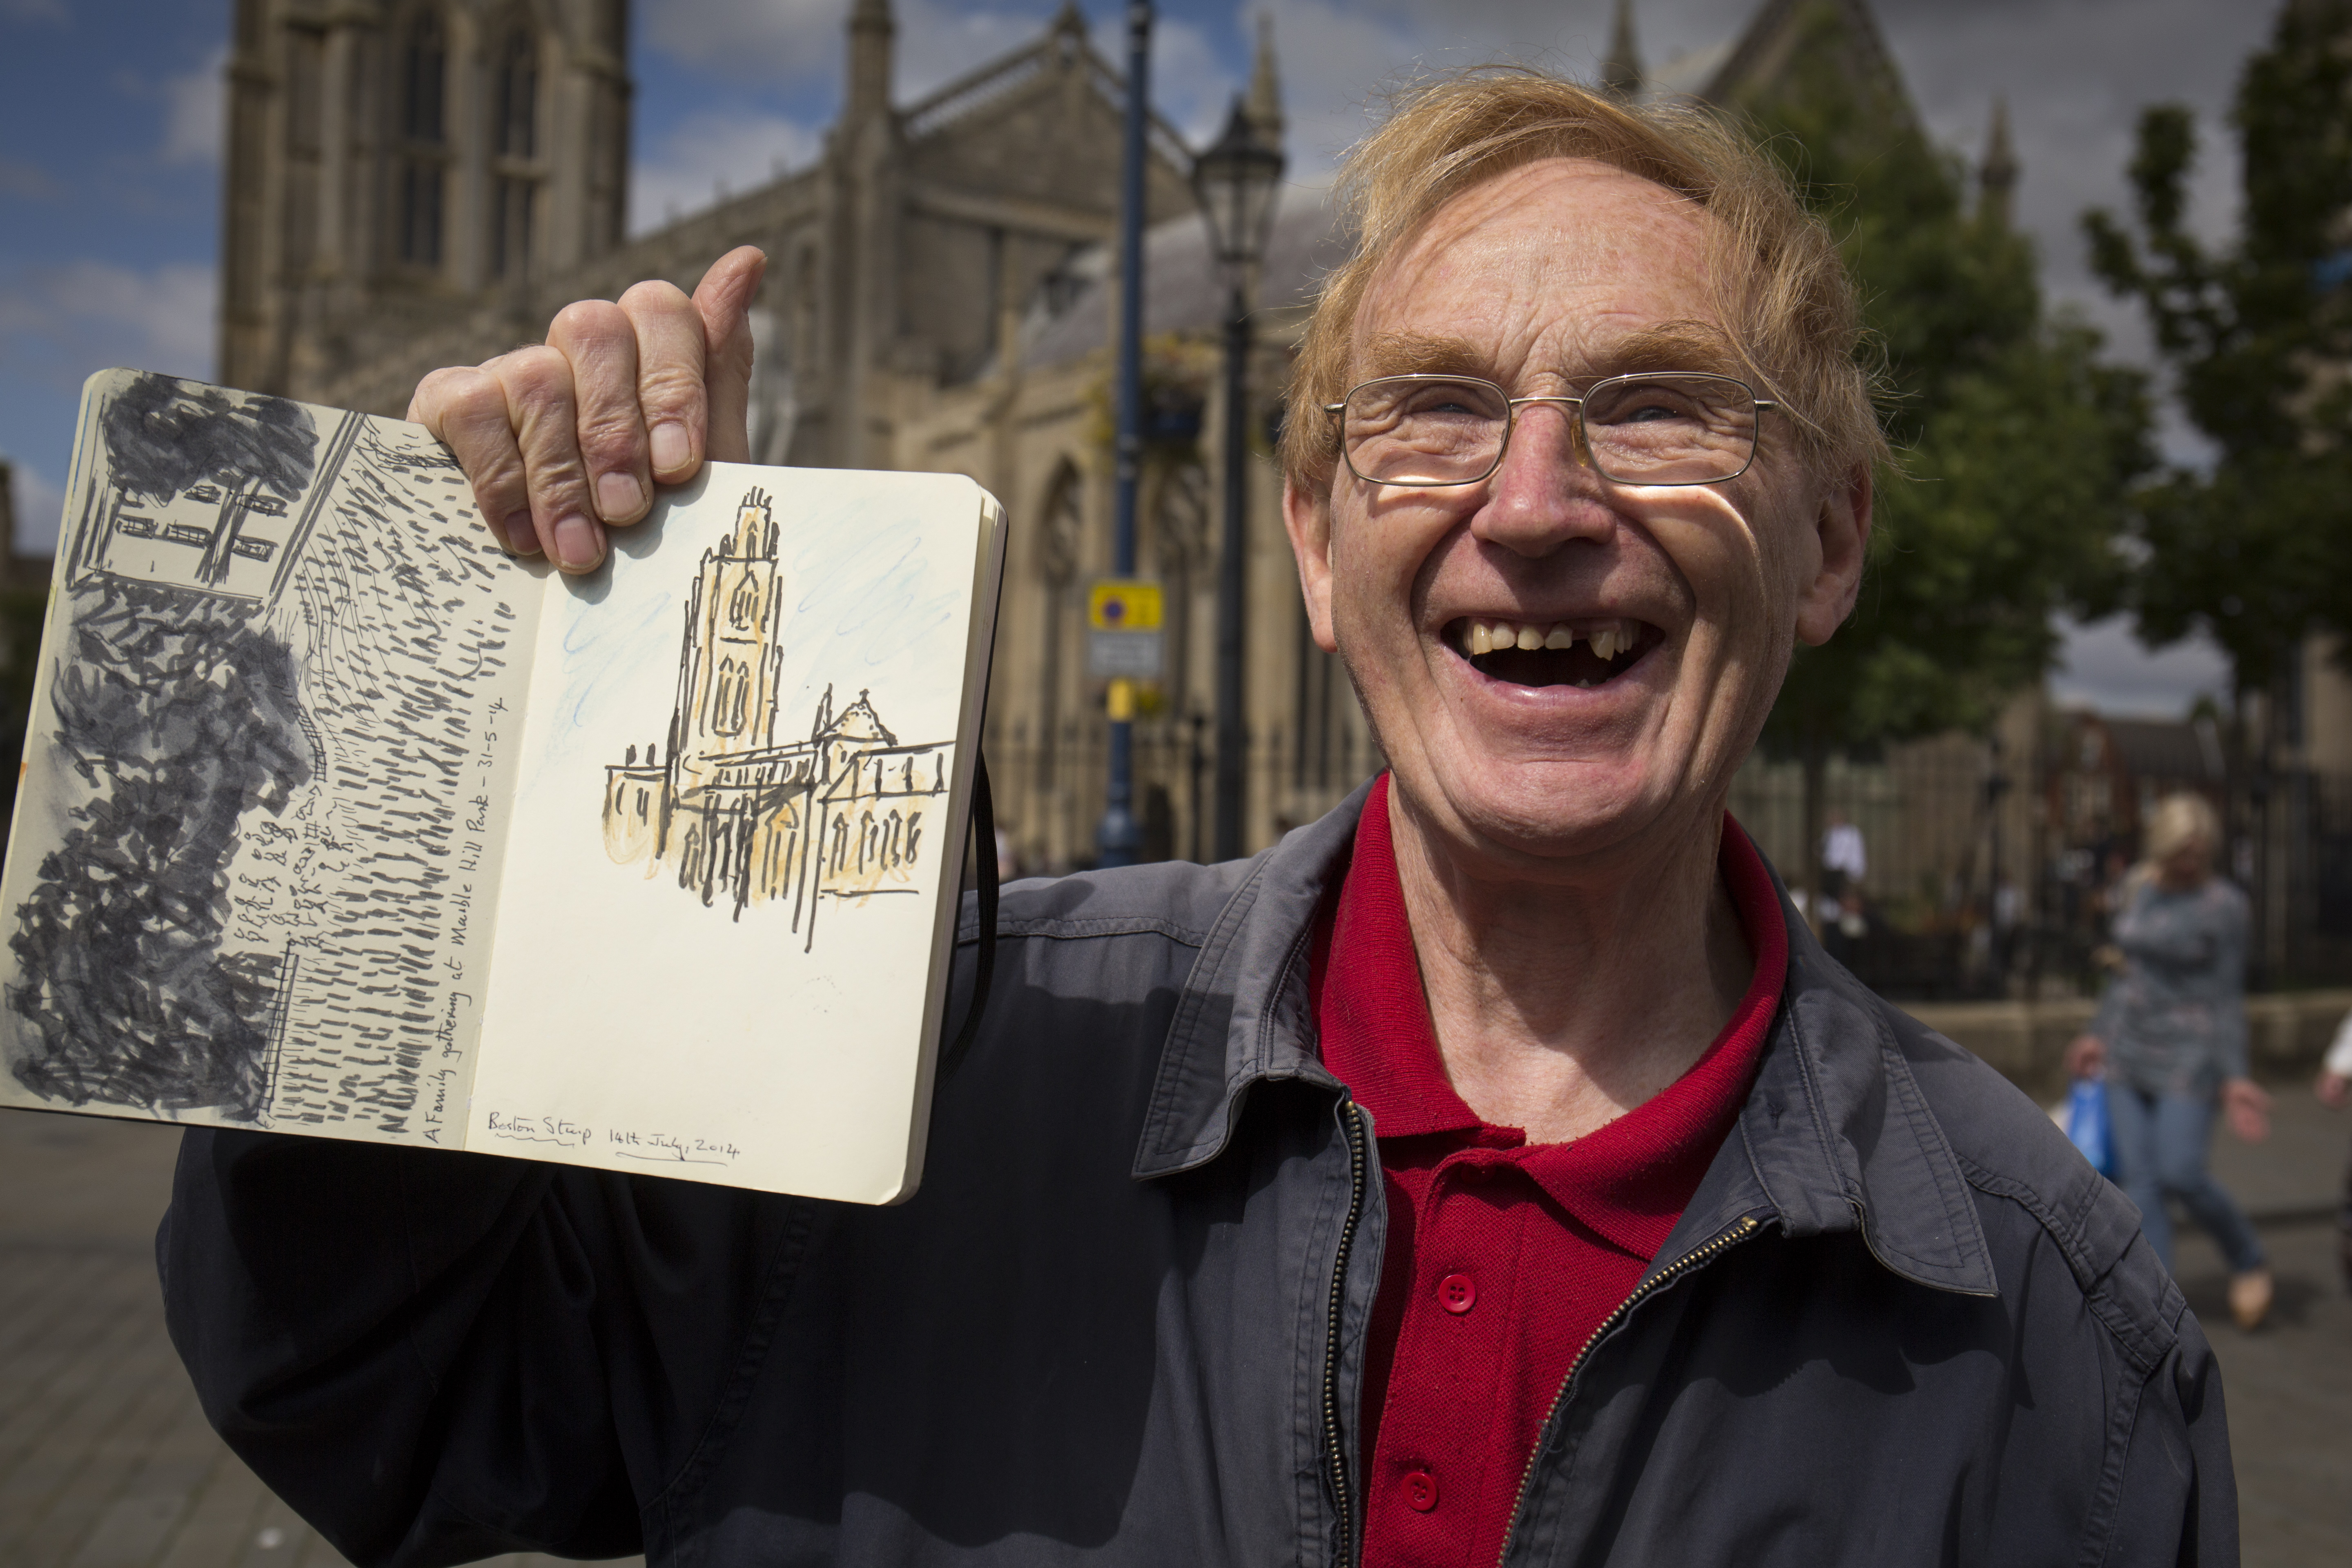 An older man holds up a drawing he has made of Lincoln Cathedral and smiles joyfully